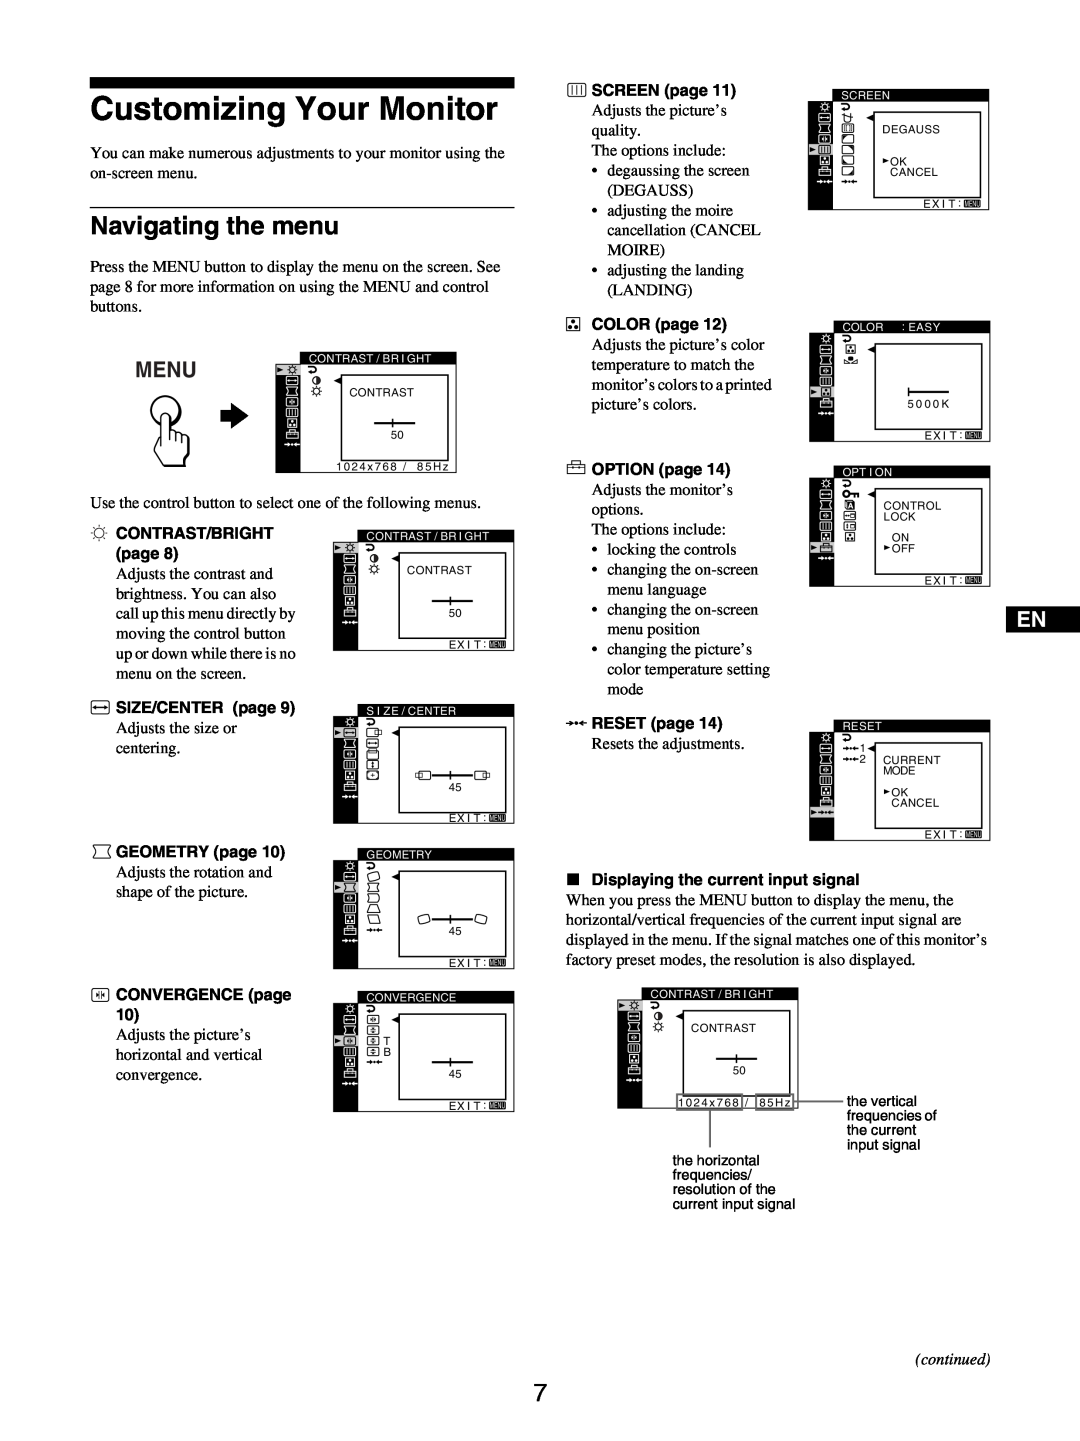 Sony GDM-5510 operating instructions Customizing Your Monitor, Navigating the menu, Menu, continued 